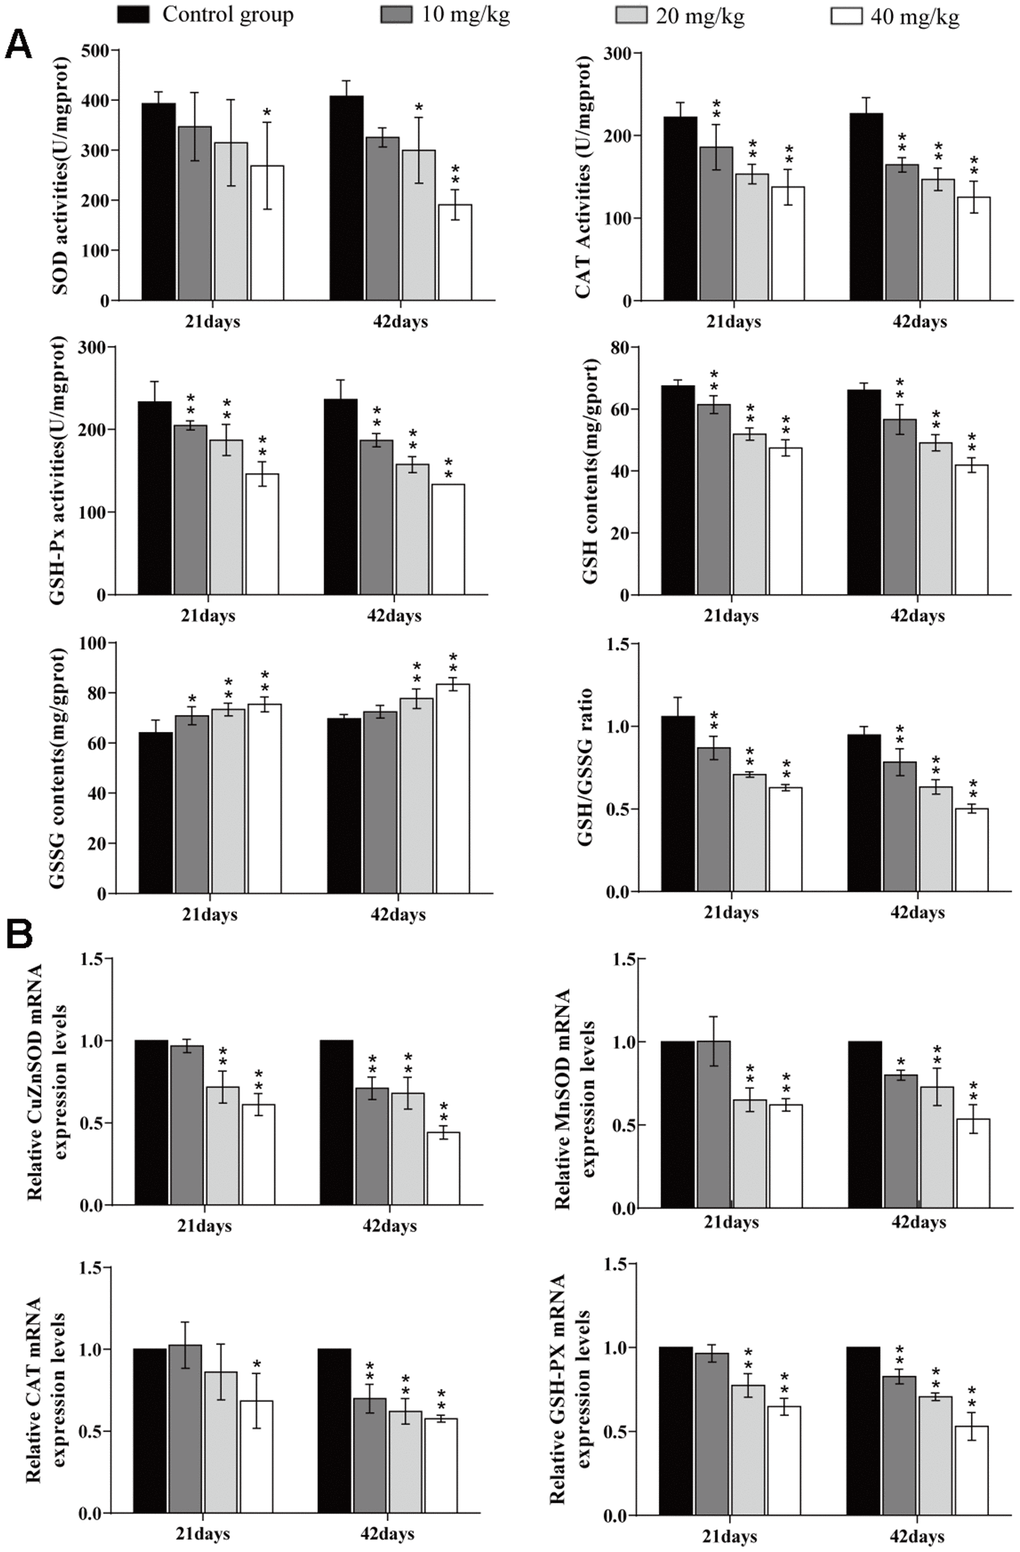 Changes of oxidative damage parameters in the lung. (A) Changes of antioxidant enzyme activities, GSH and GSSG contents, and GSG/GSSG ratio in the lung at 21 and 42 days of the experiment. (B) Changes of mRNA expression levels of antioxidant enzymes in the lung. Data are presented with the mean± standard deviation (n=8). *p 